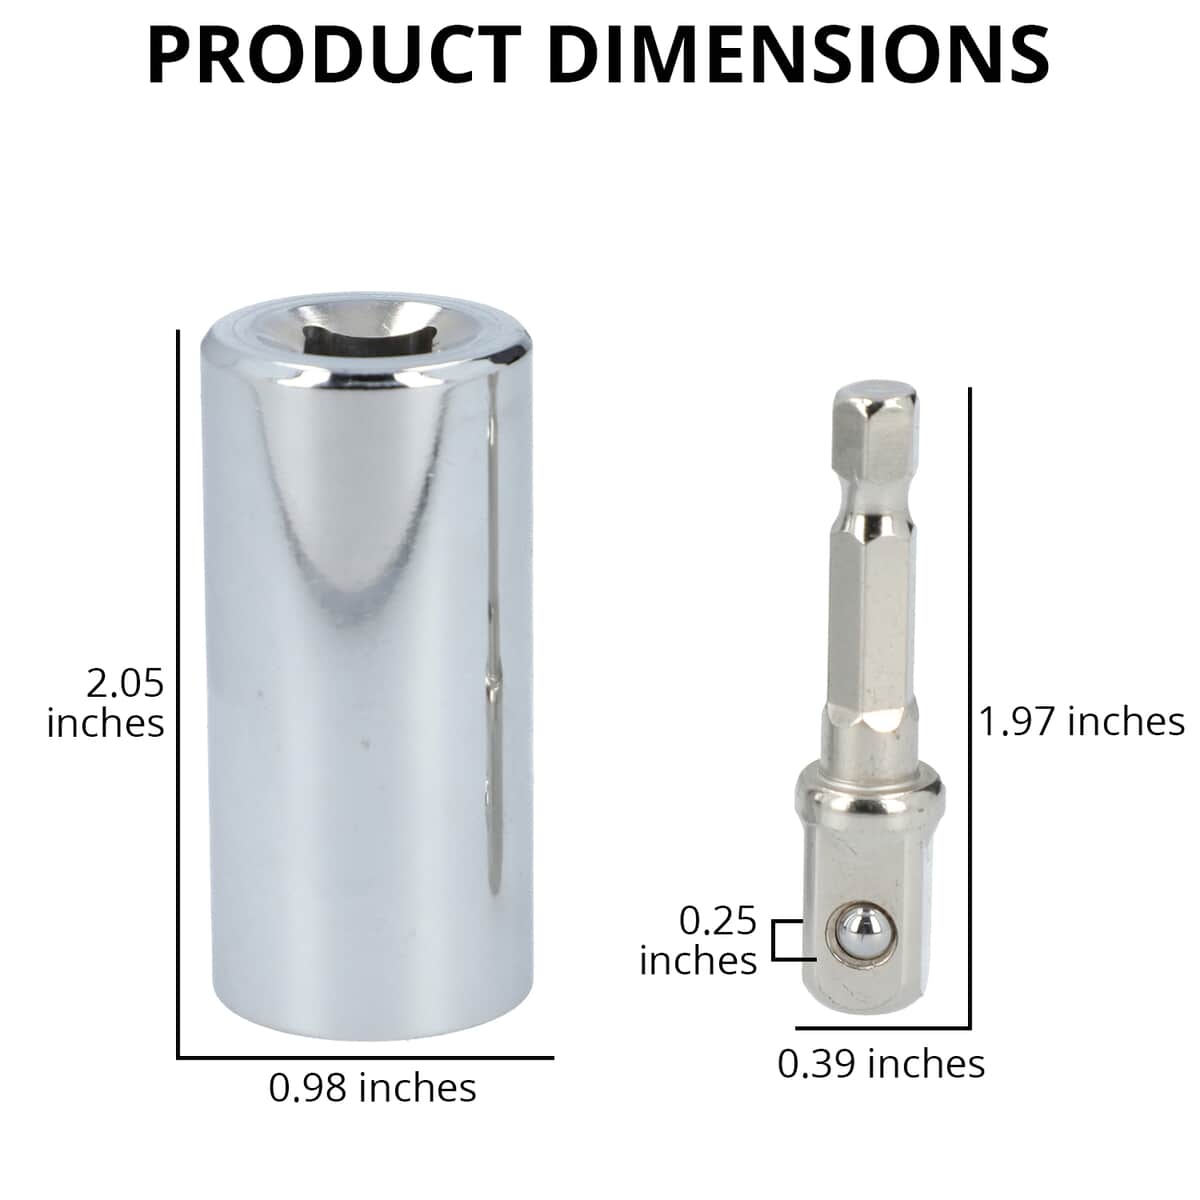 Set of 2 Universal Socket (2.05"x0.98") with Drill Adapter (1.97"x0.39"x0.25") in Stainless Steel - Silver Color image number 4